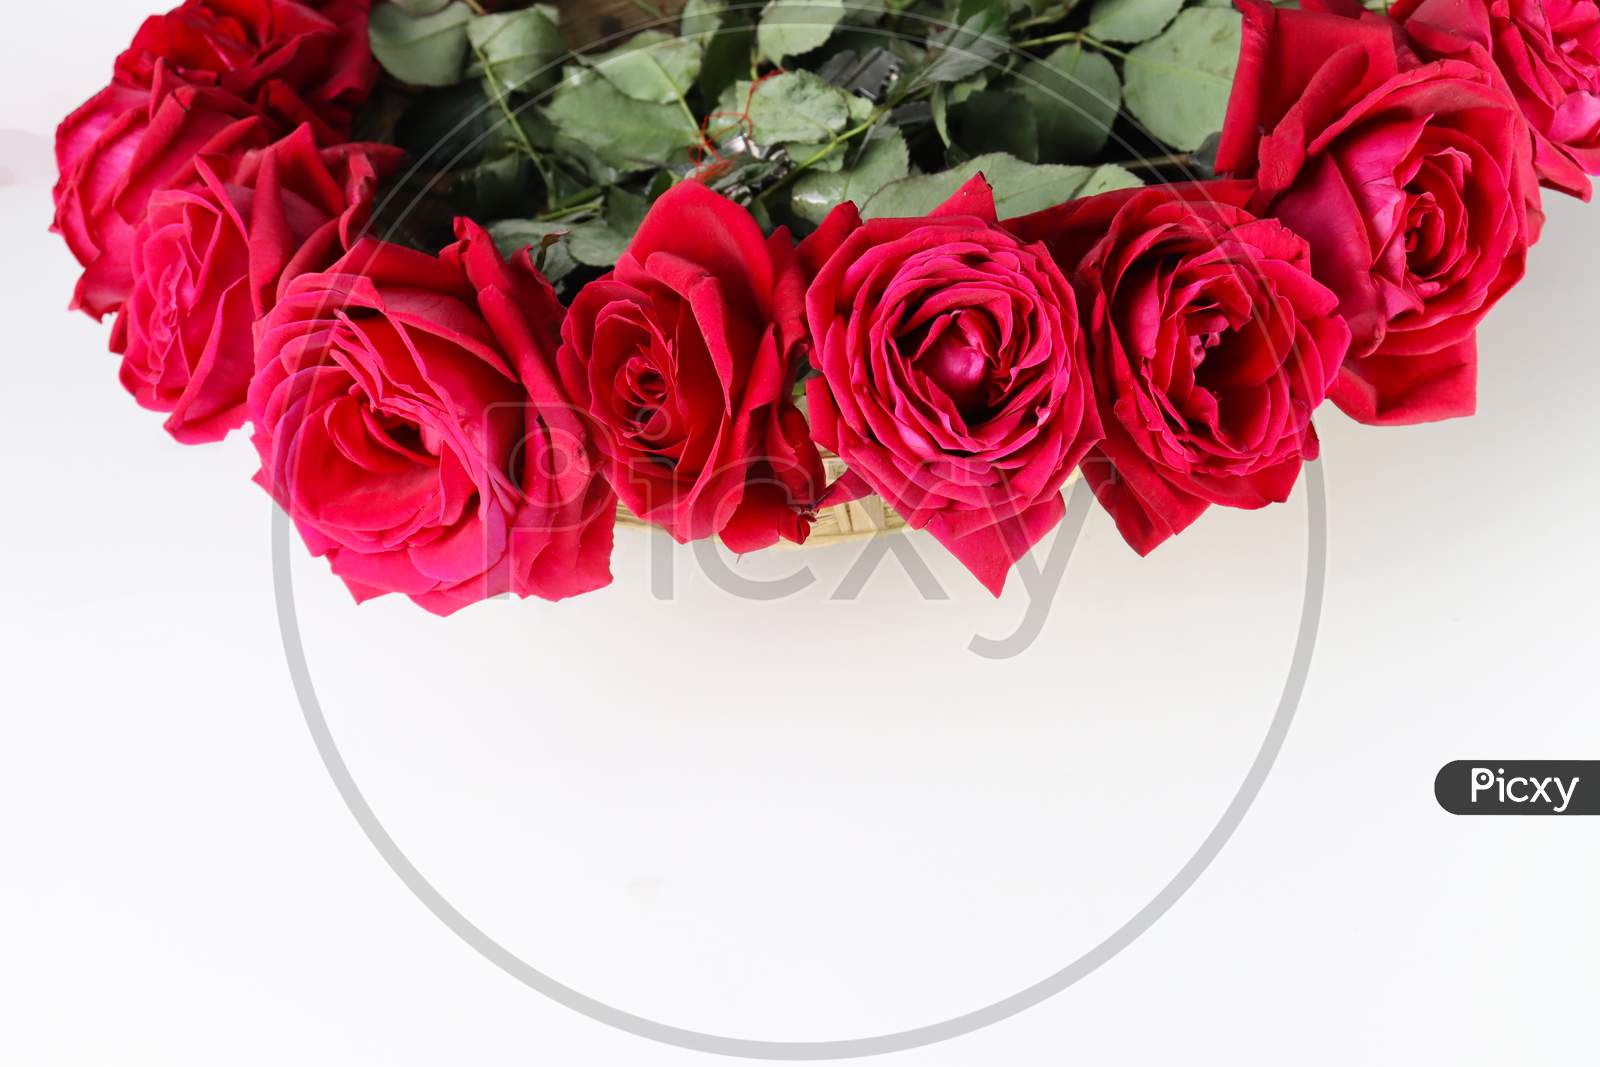 Red Rose Stock For Valentine